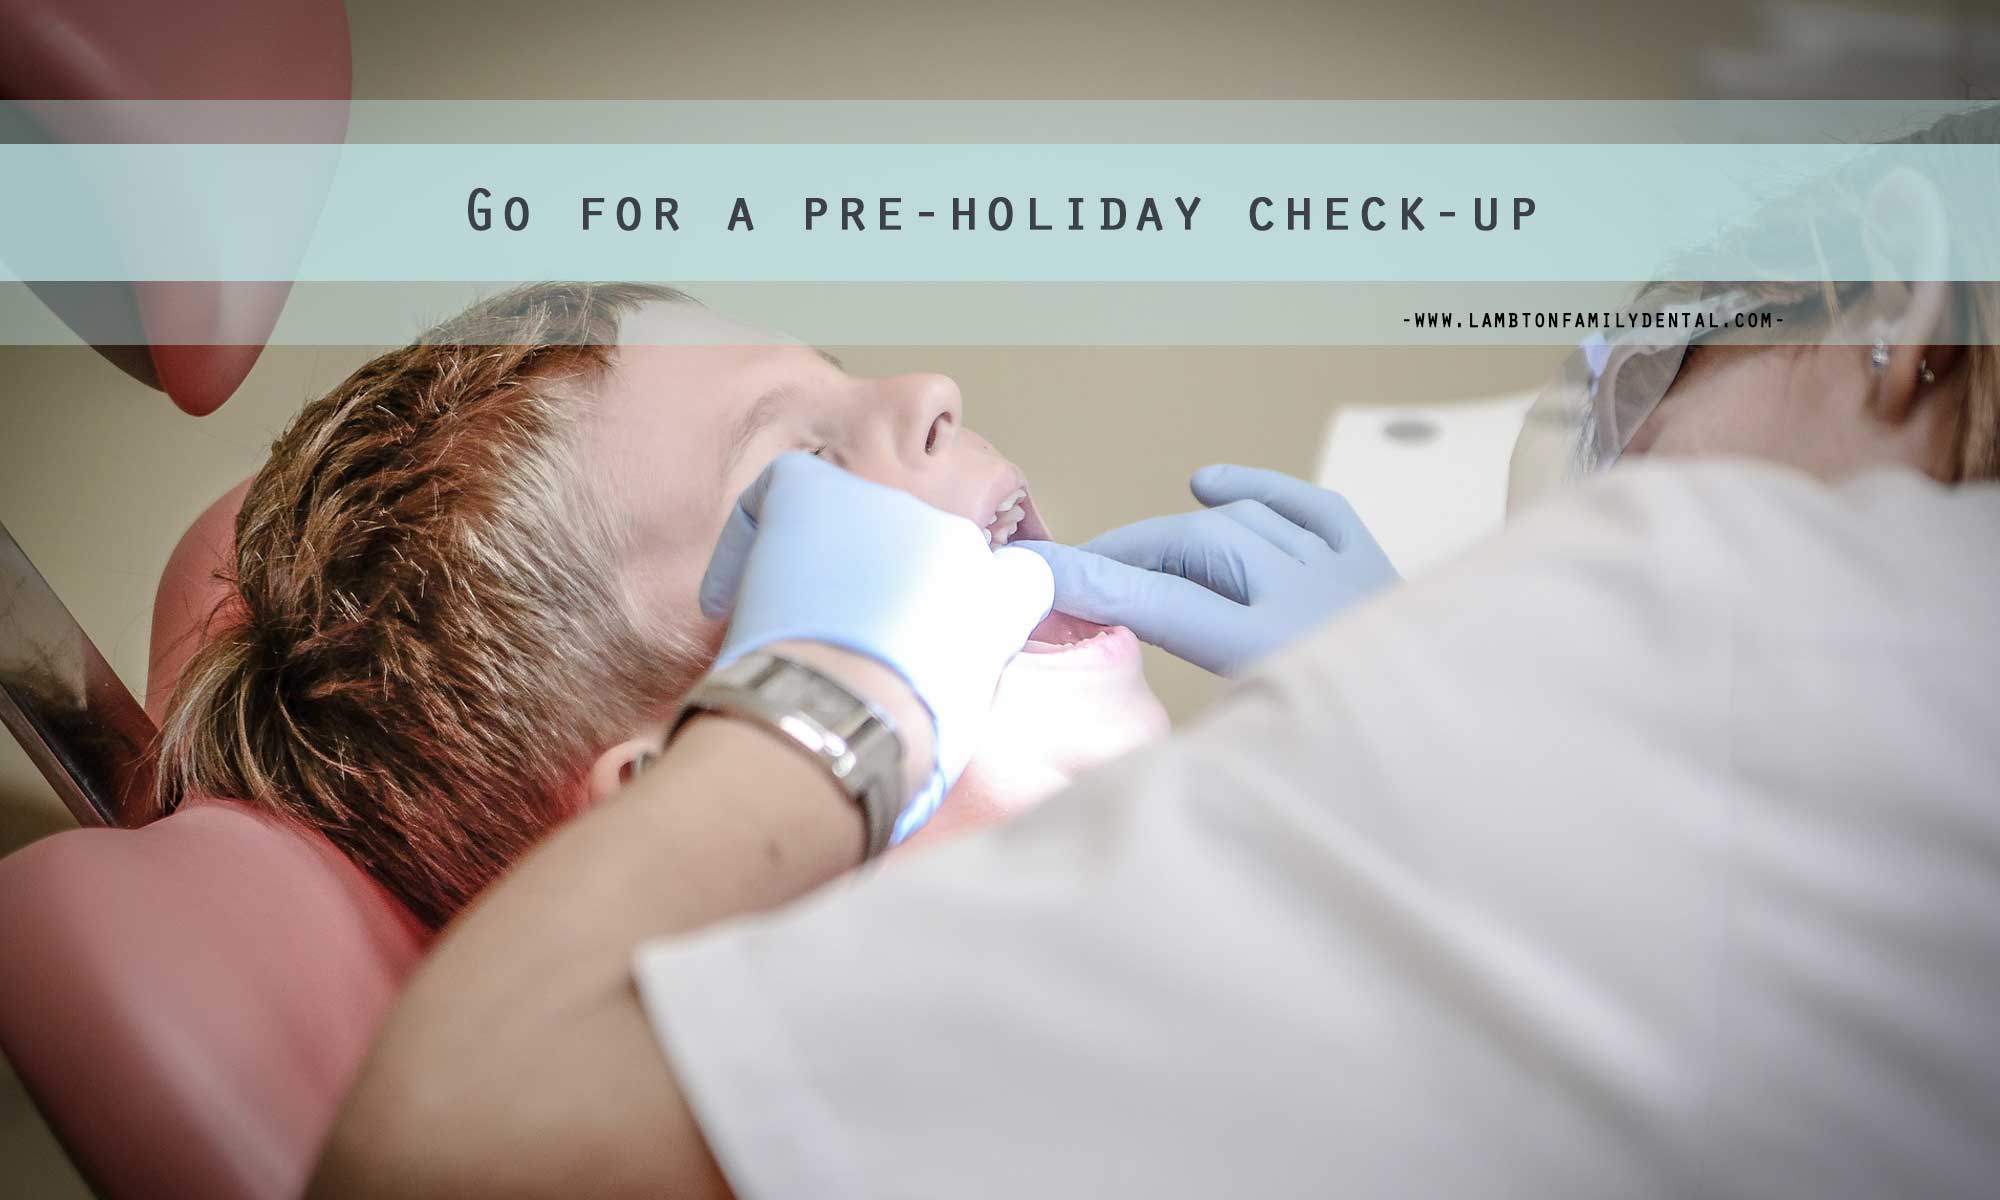 Go for a pre-holiday check-up